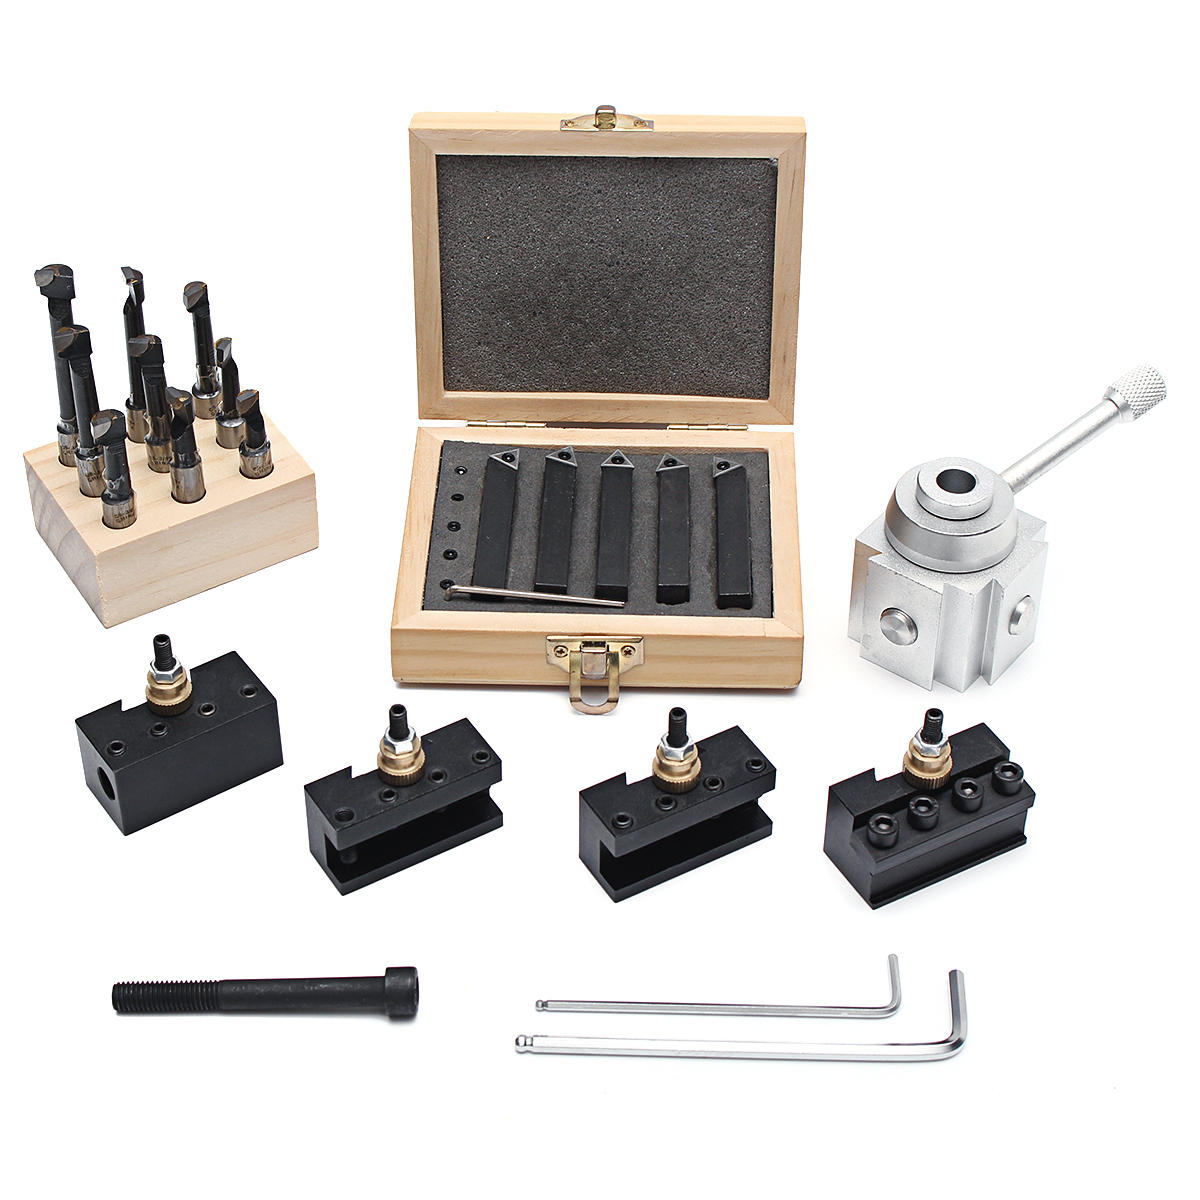 

Mini Quick Change Tool Post Holder Set with 9pcs 3/8 Inch Boring Bar and 5pcs Indexable Blade